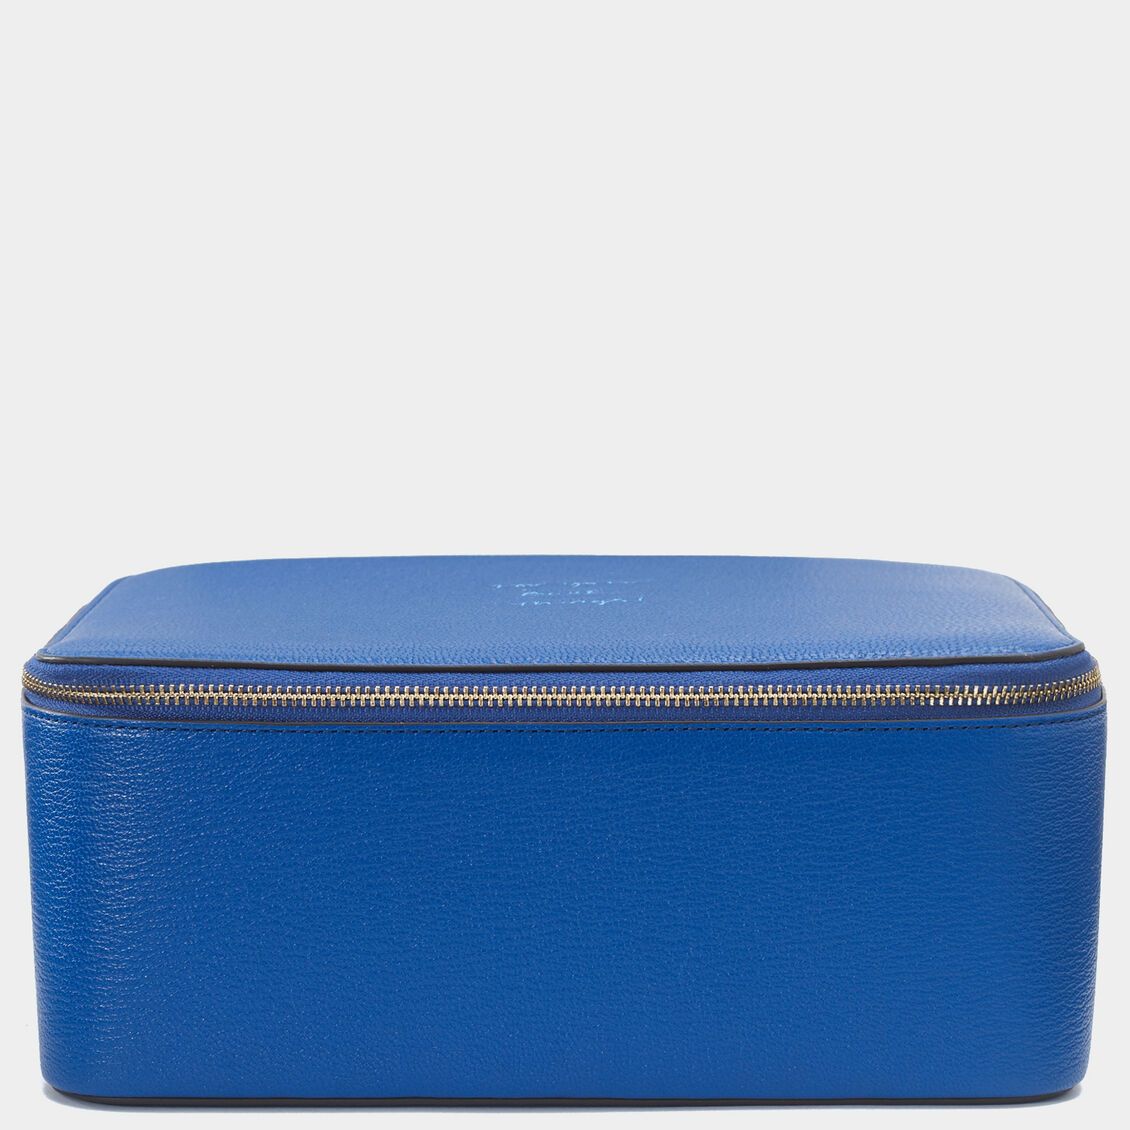 Yes No Maybe Wow Box XL -

                  
                    Capra Leather in Electric Blue -
                  

                  Anya Hindmarch US
